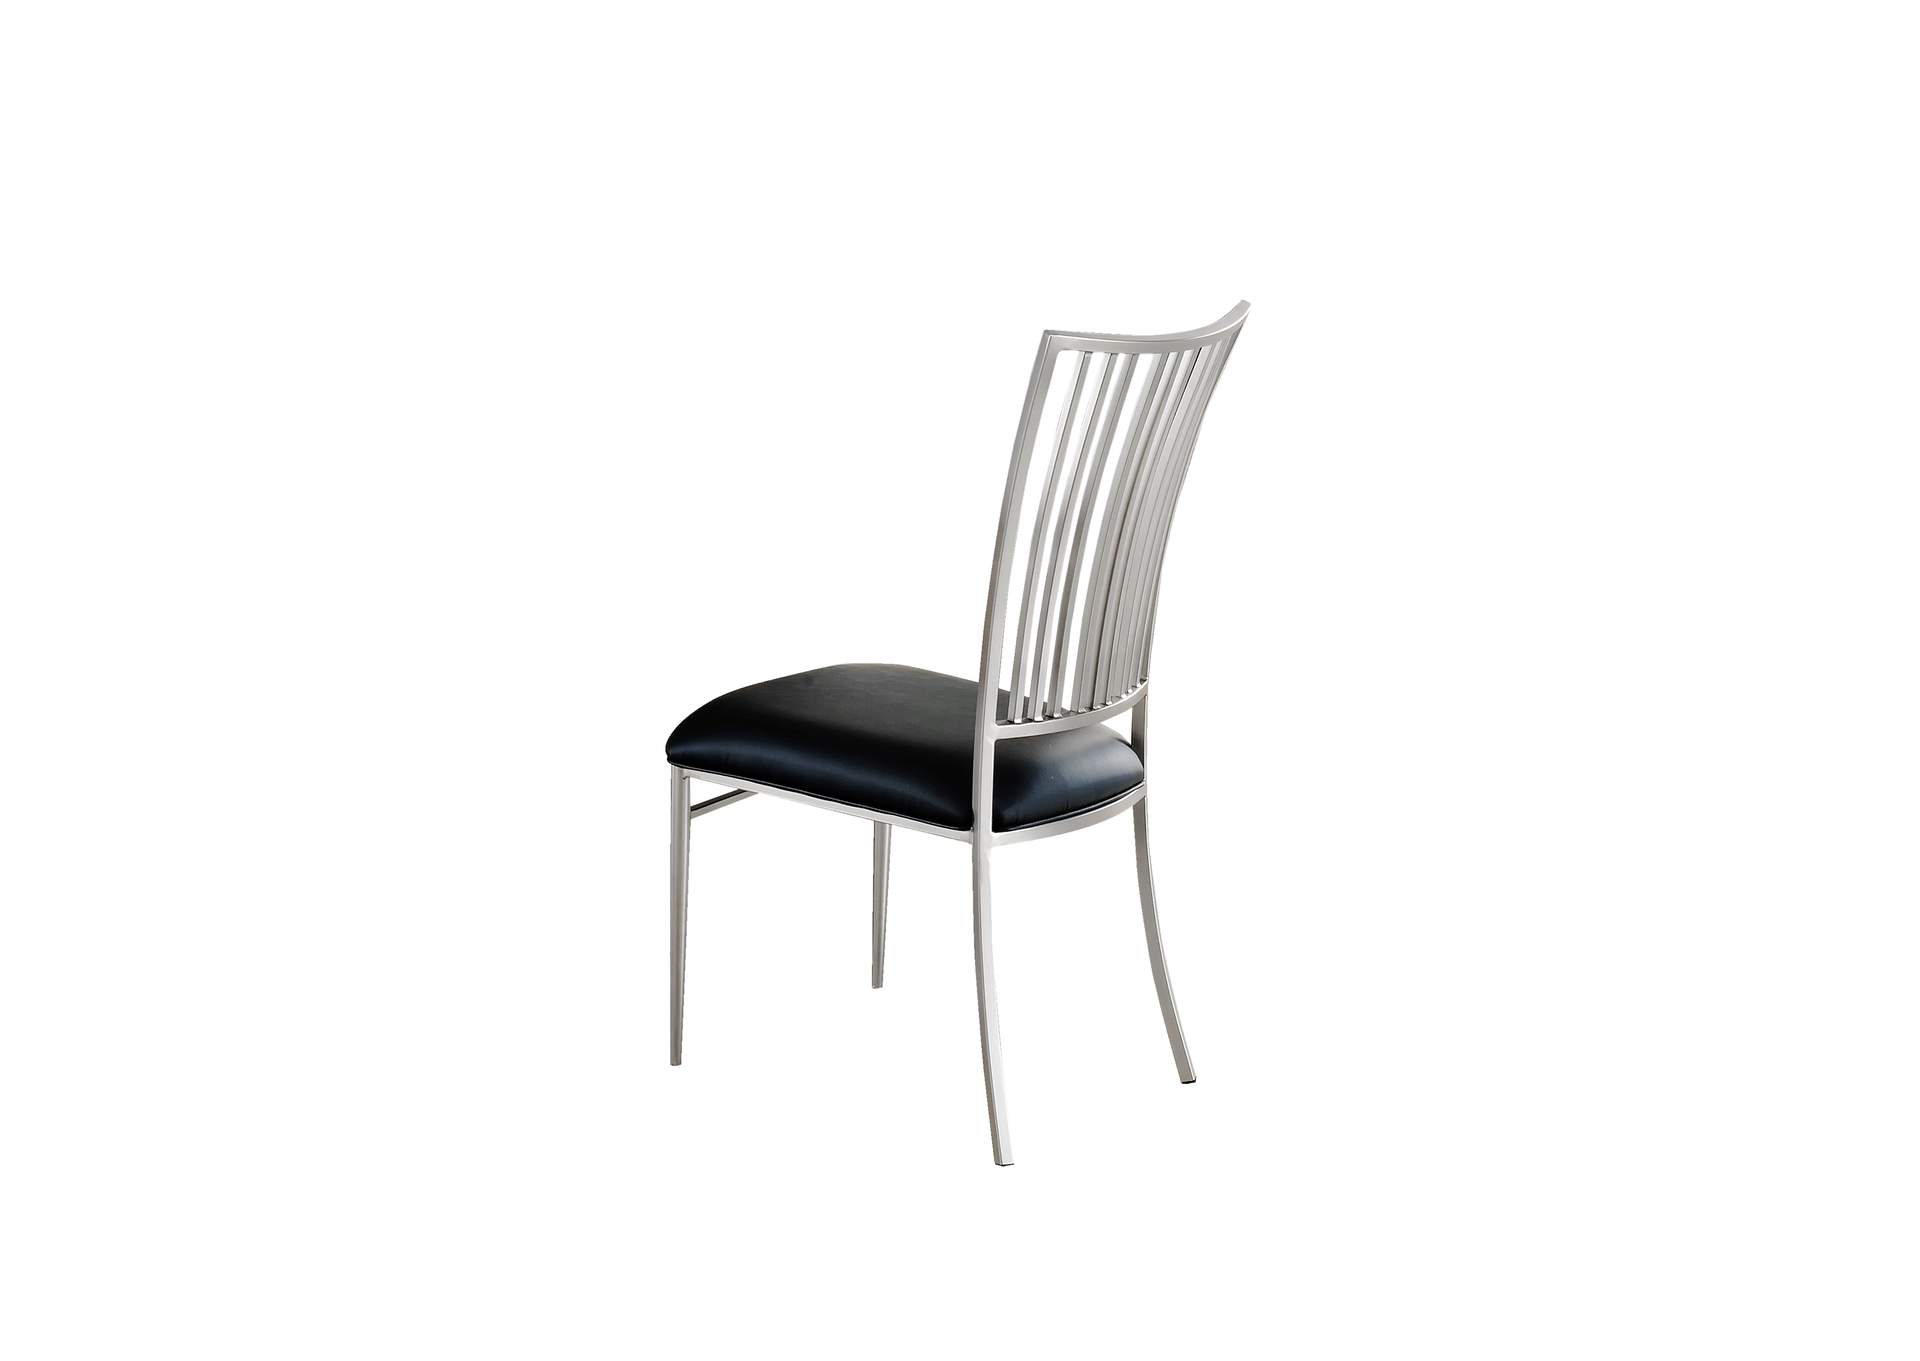 Fan-Back Side Chair,Chintaly Imports